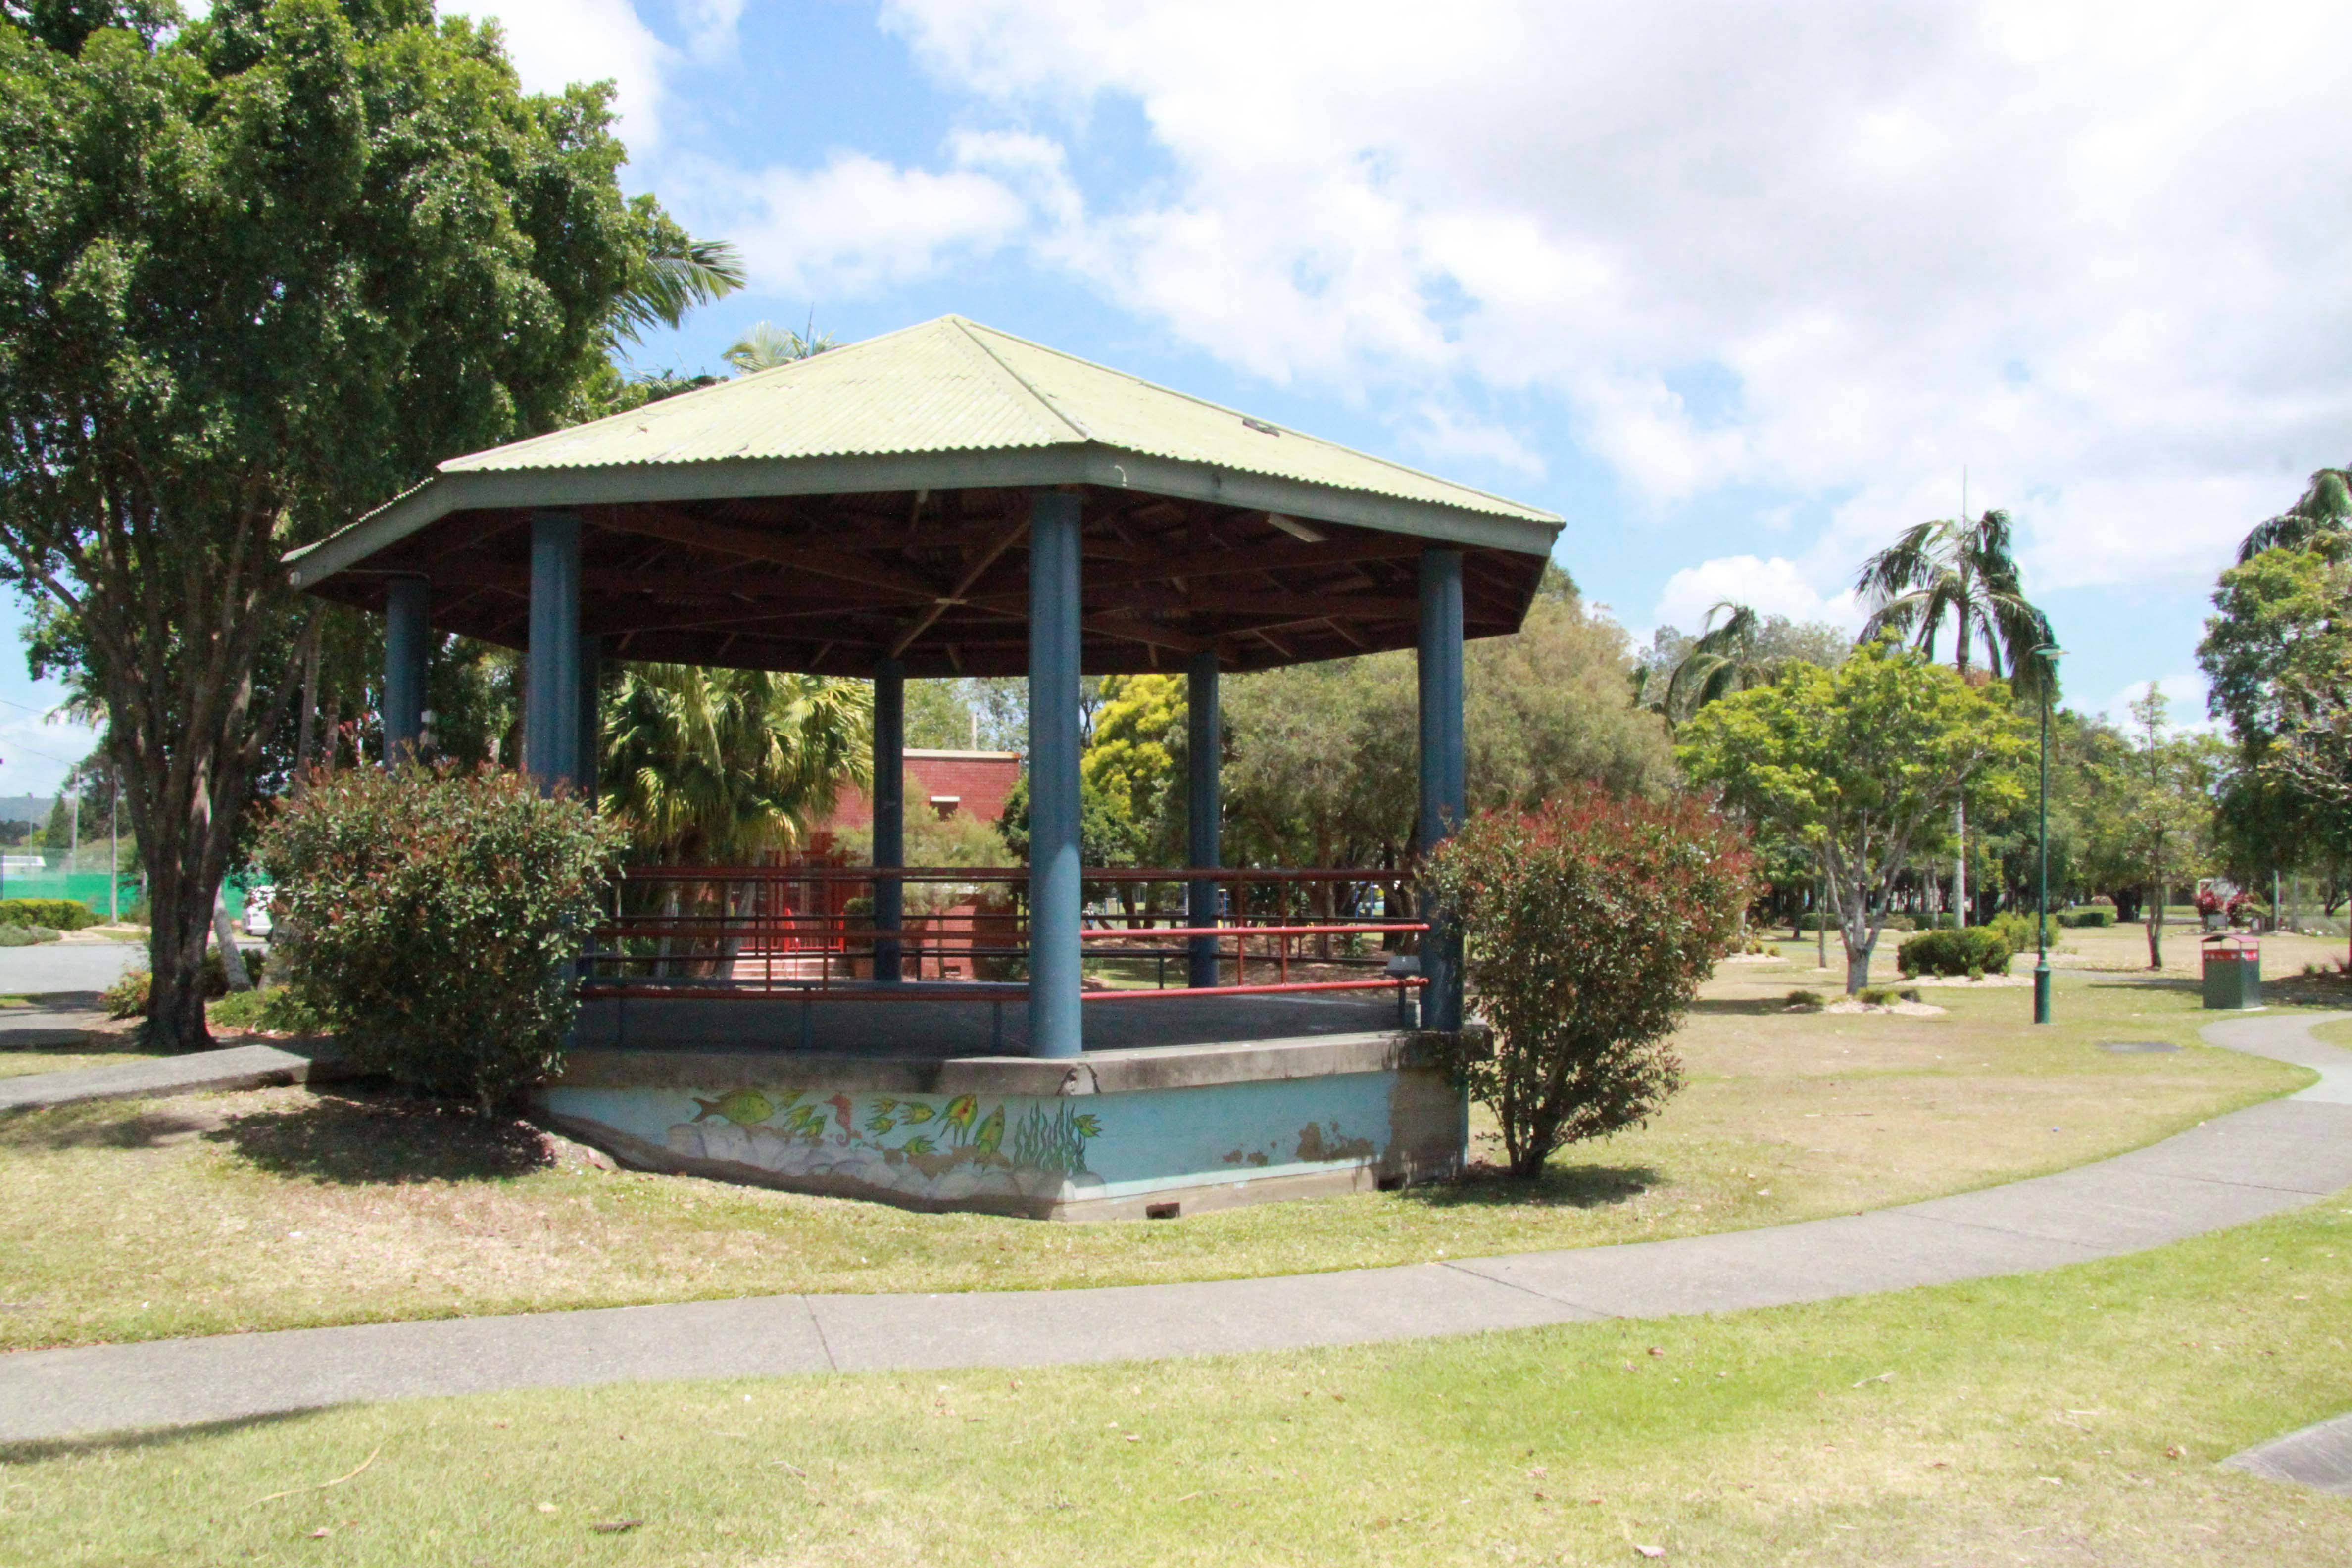 The existing bandstand